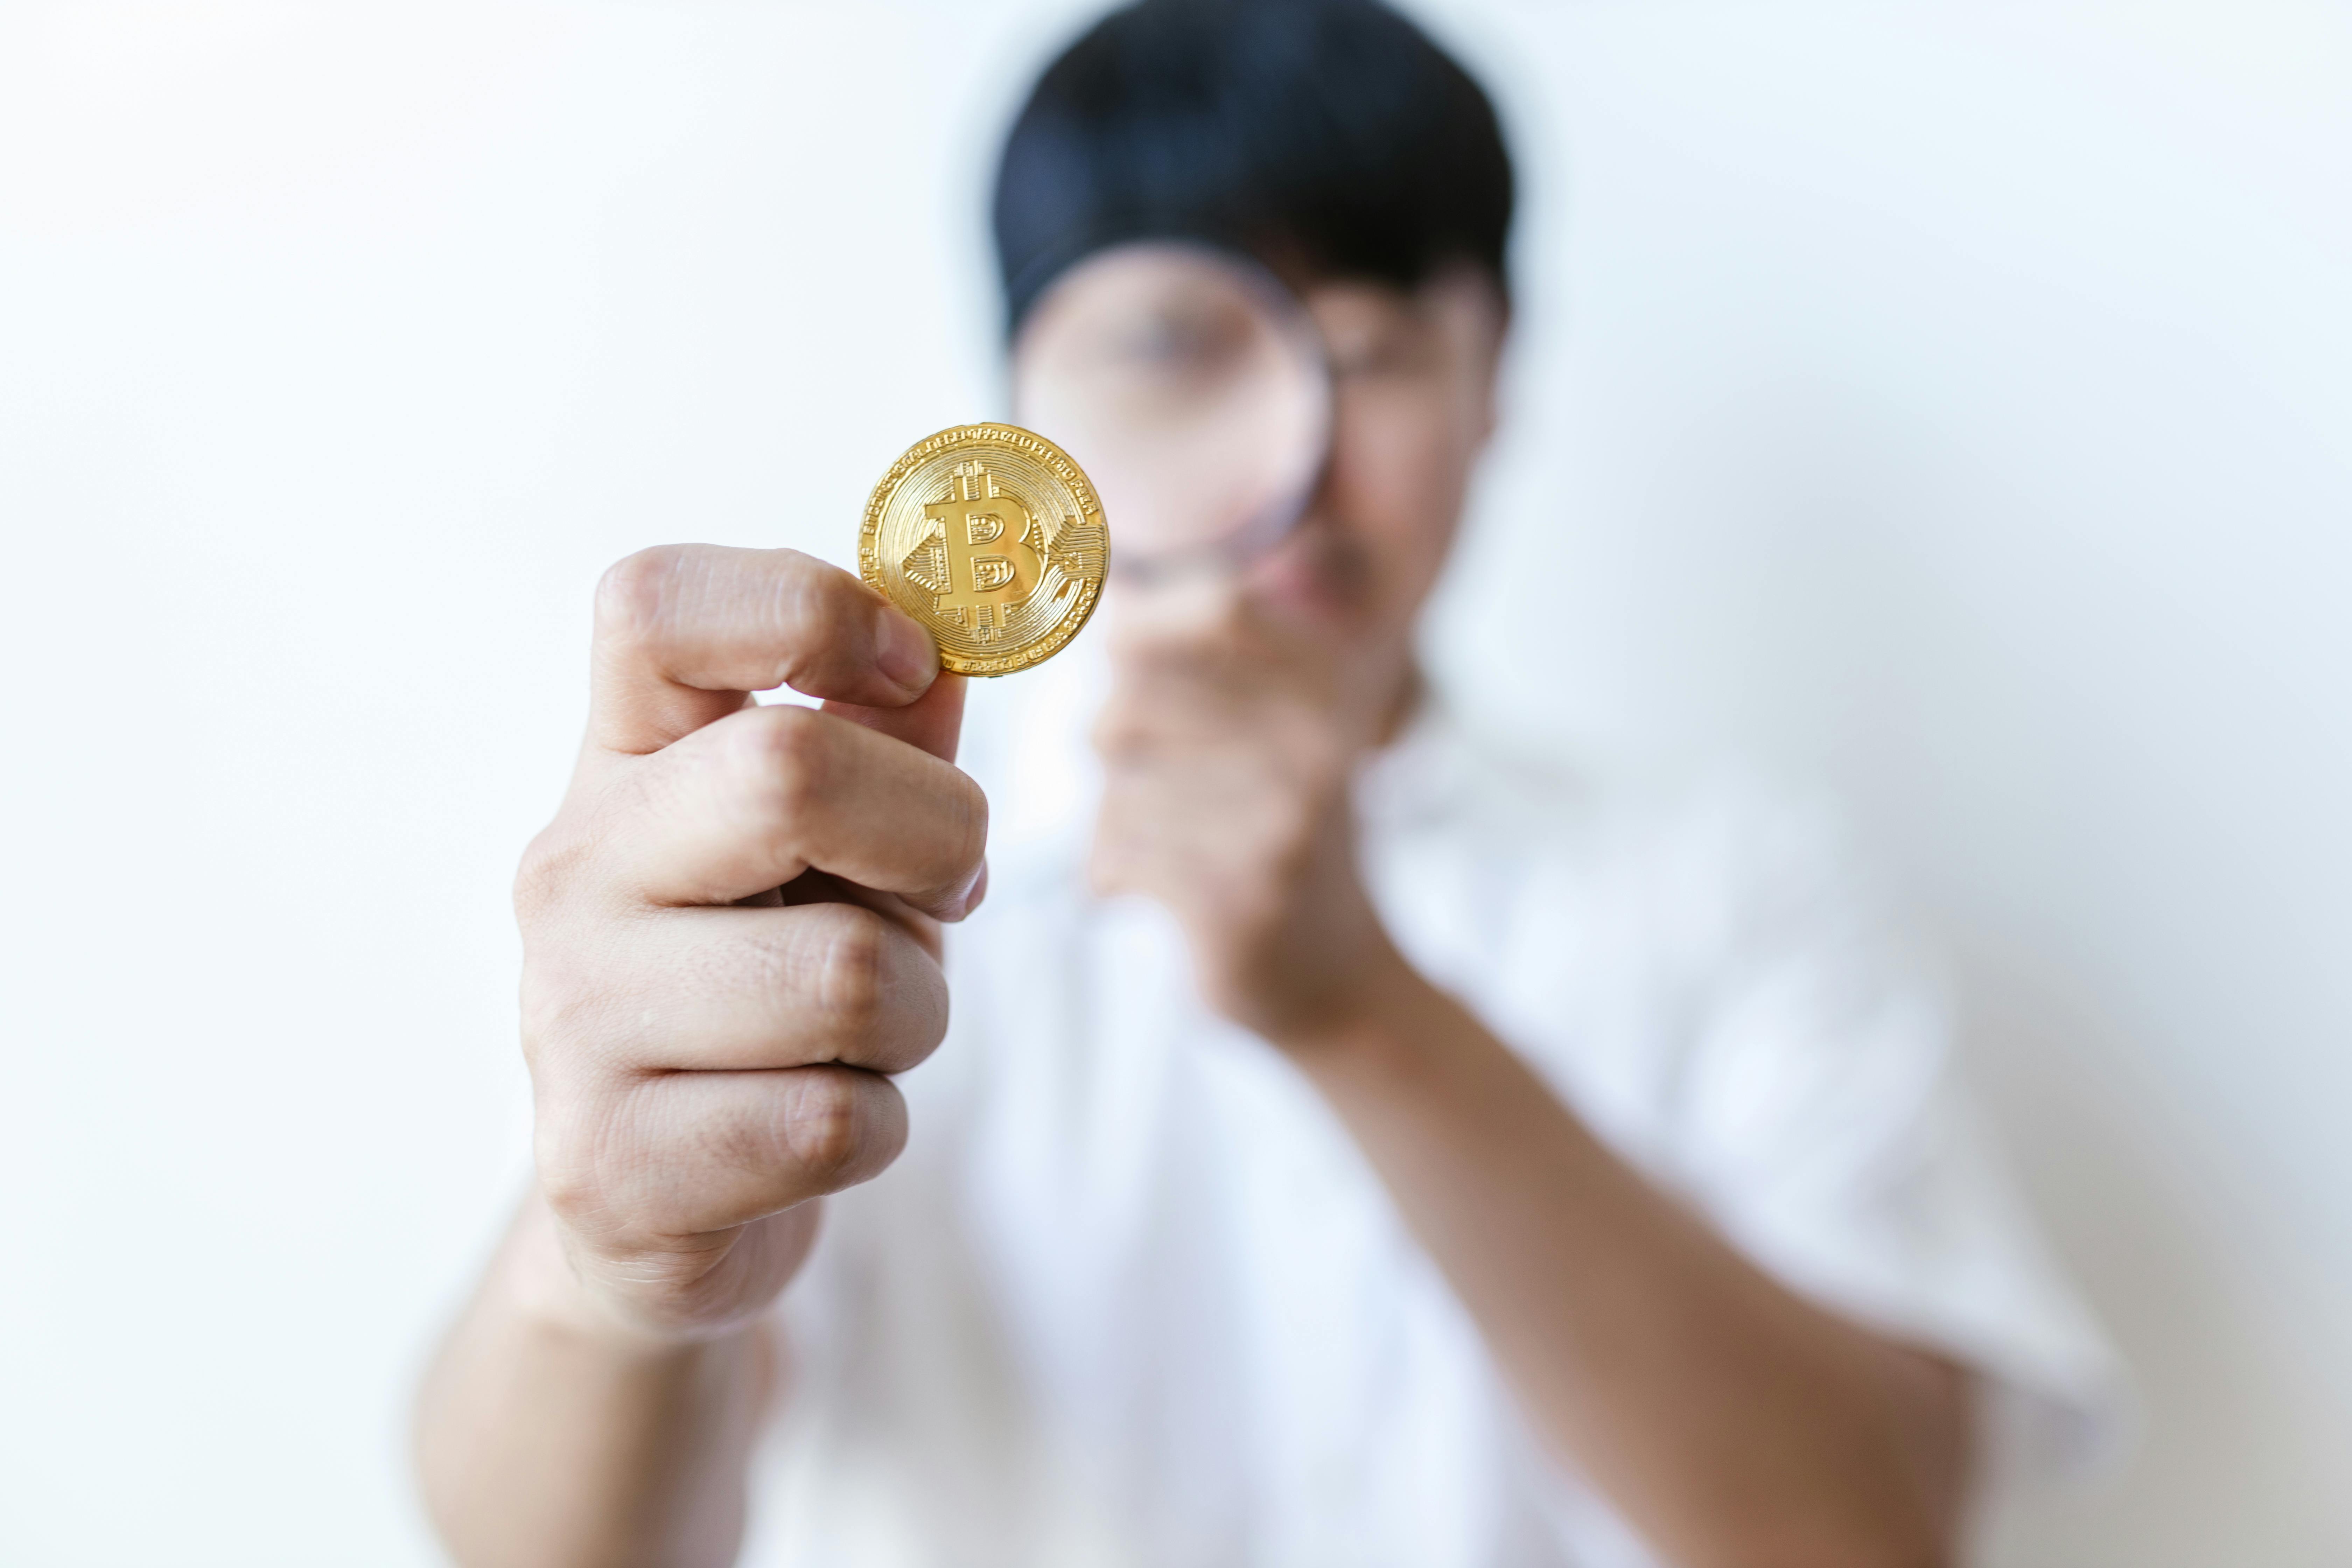 selective focus photo of gold coin held by a man